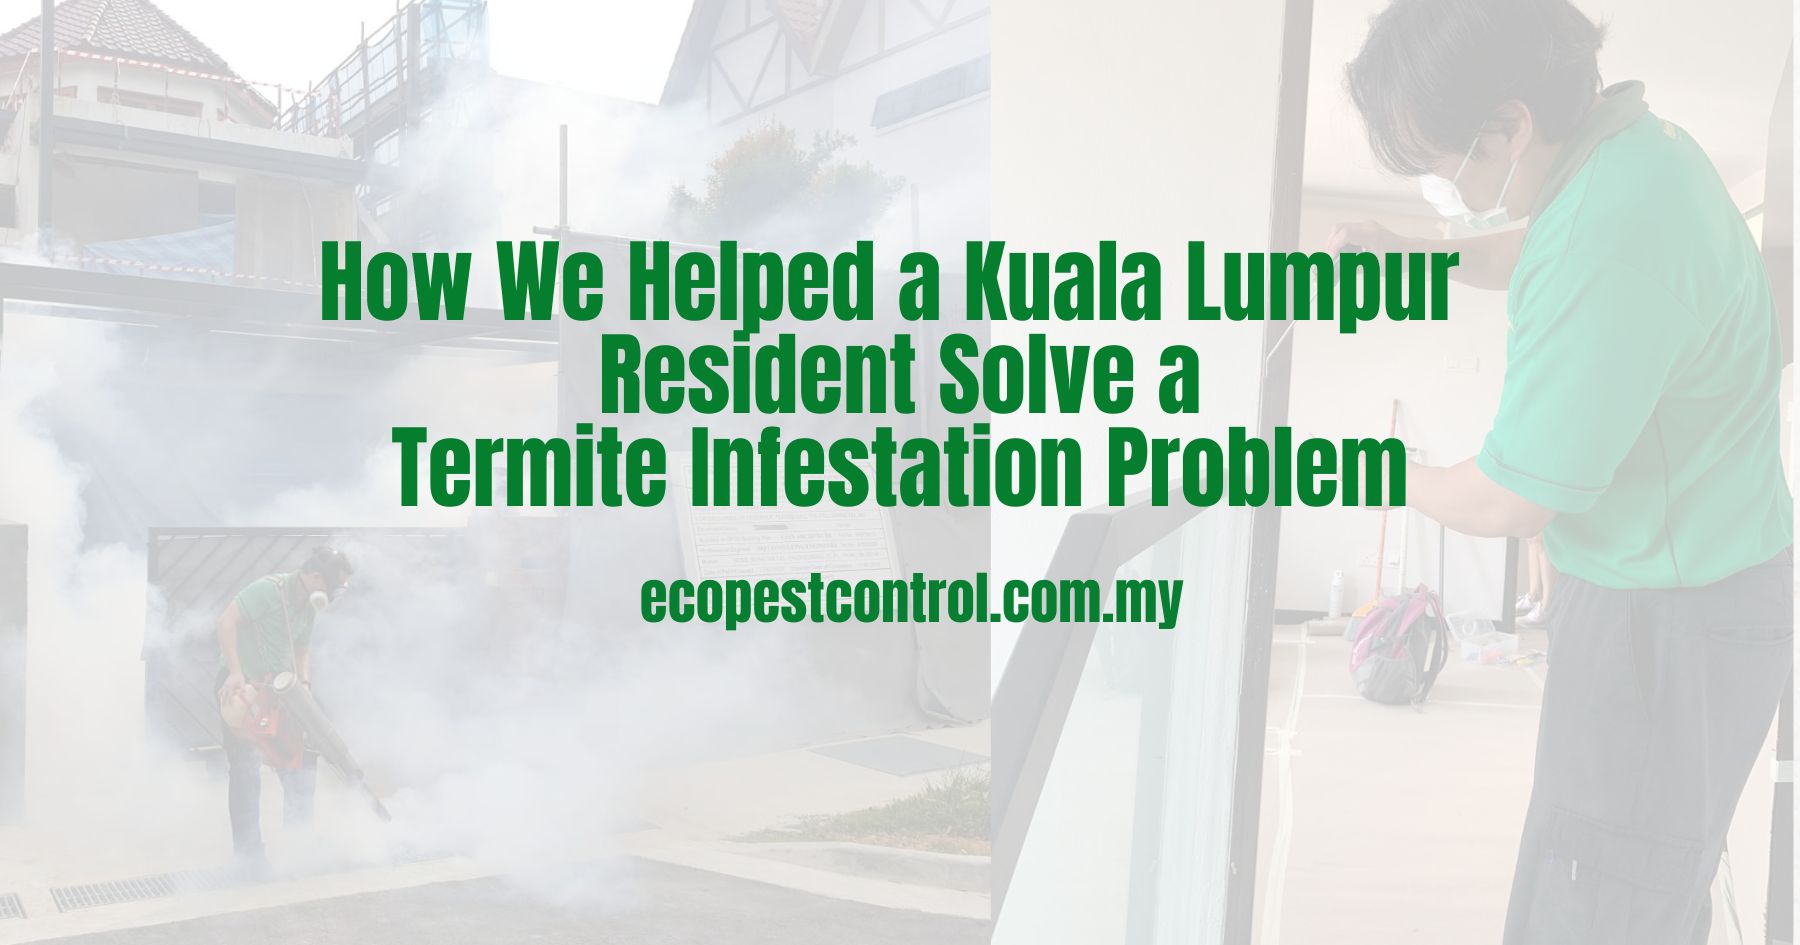 How We Eliminated Bed Bug Infestations In Kuala Lumpur Hotels